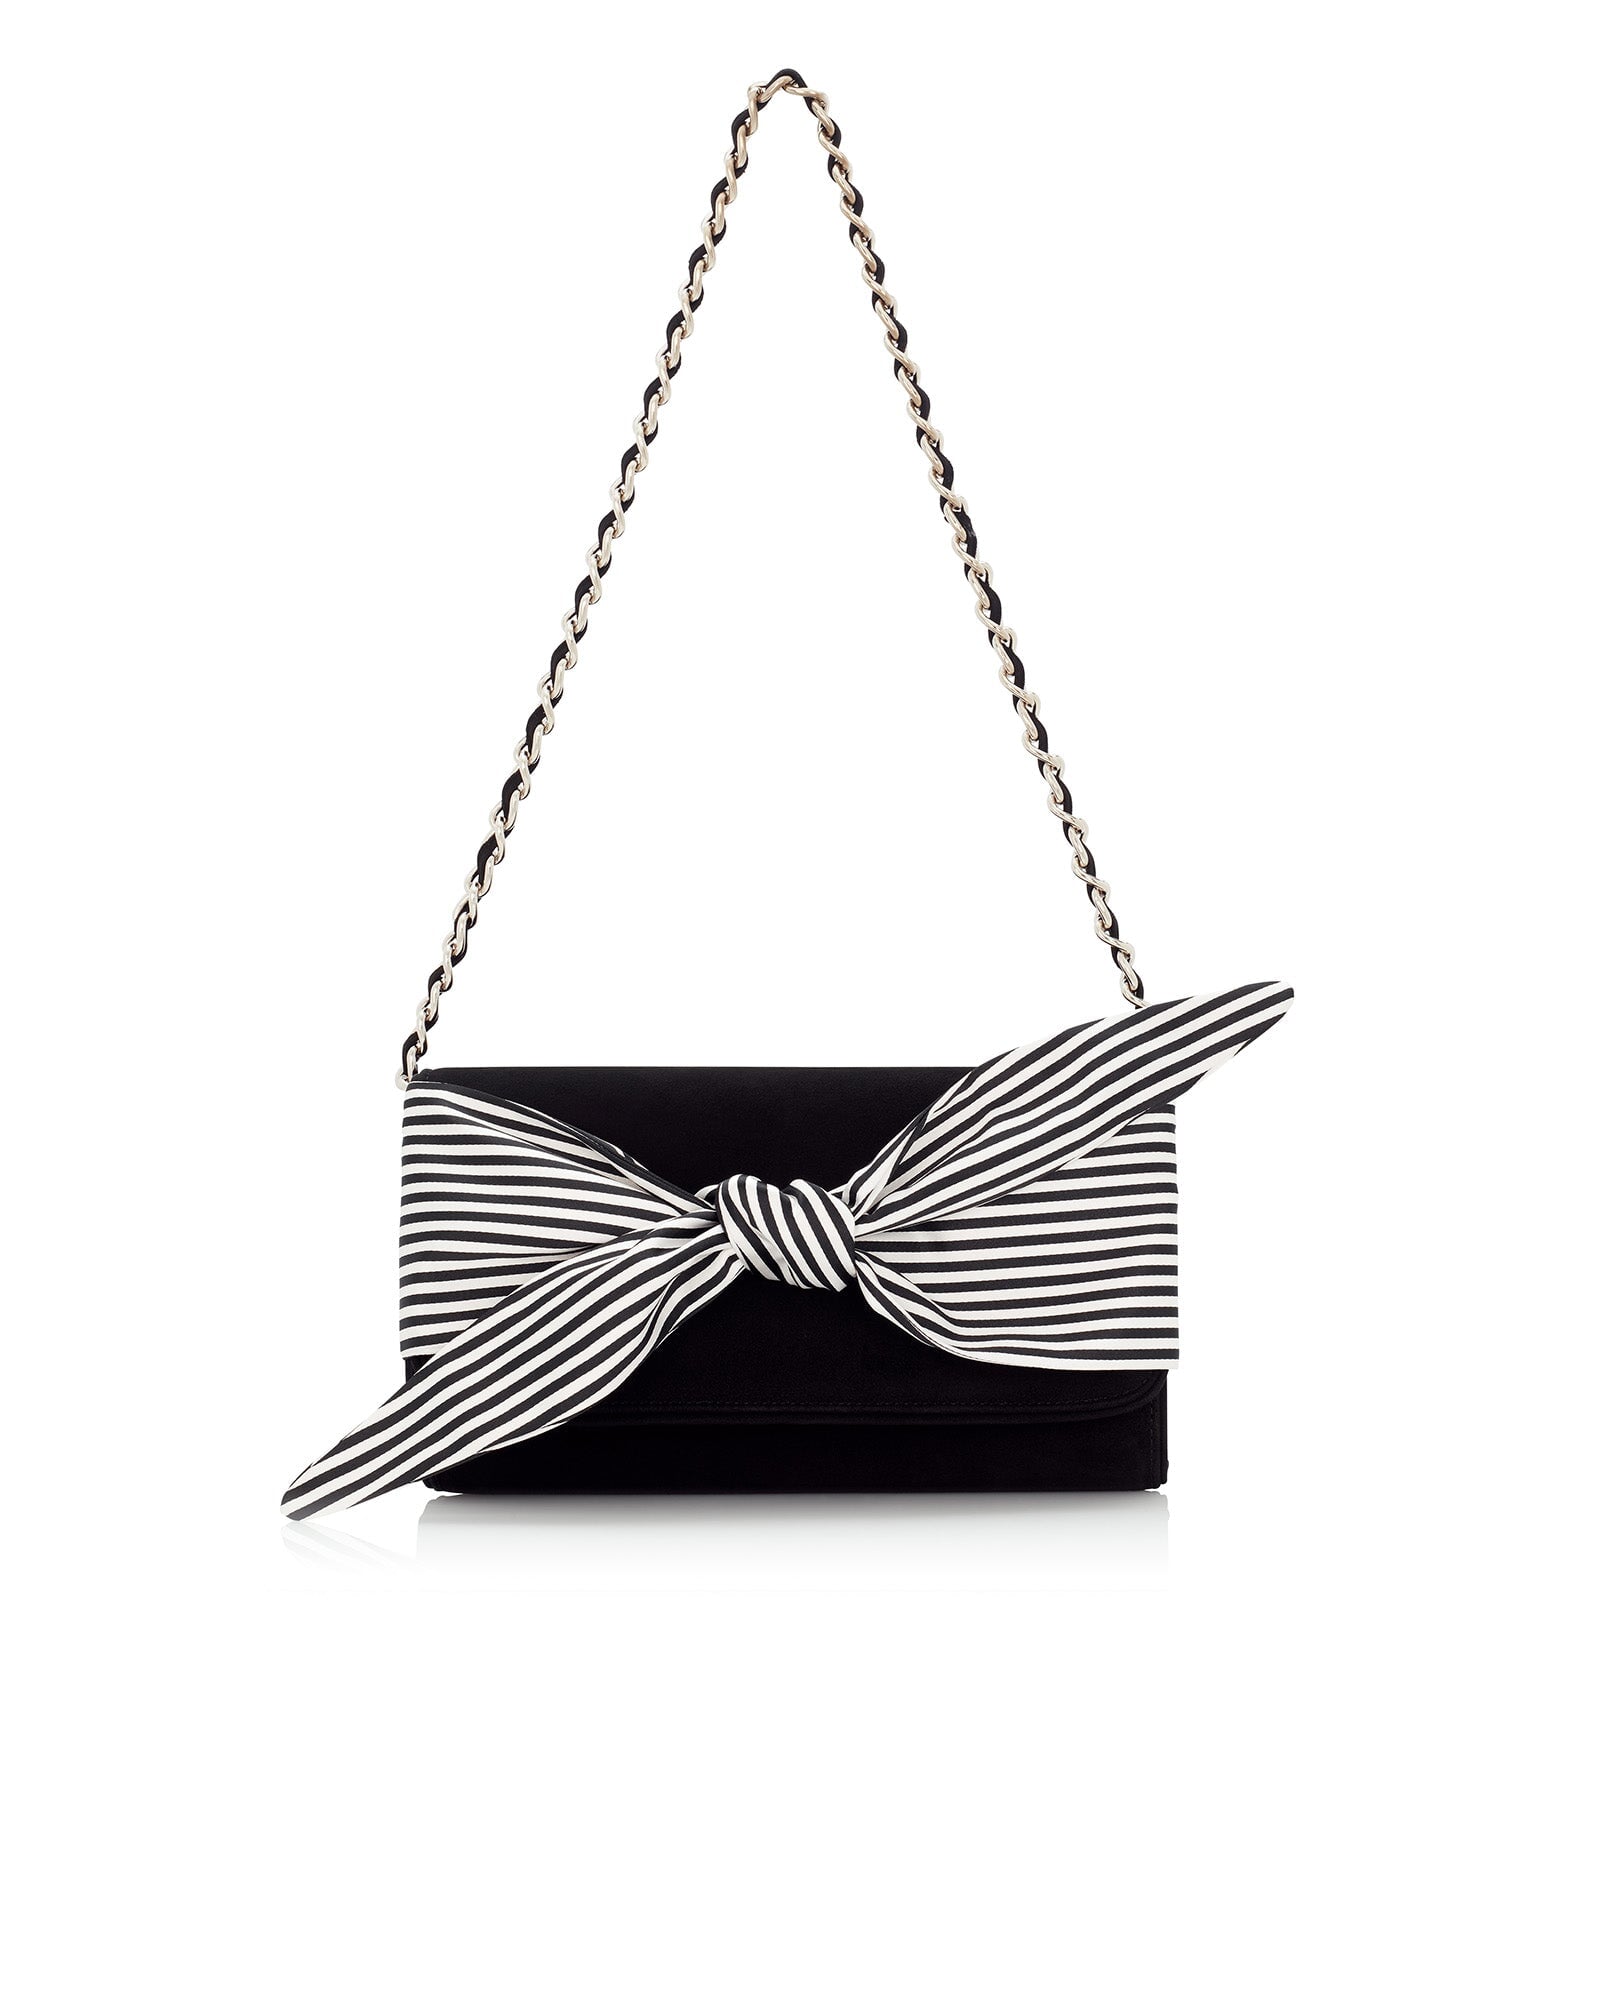 Florence Liquorice Clutch Occasion Bag Black Suede Clutch Bag with Print Satin Bow  image